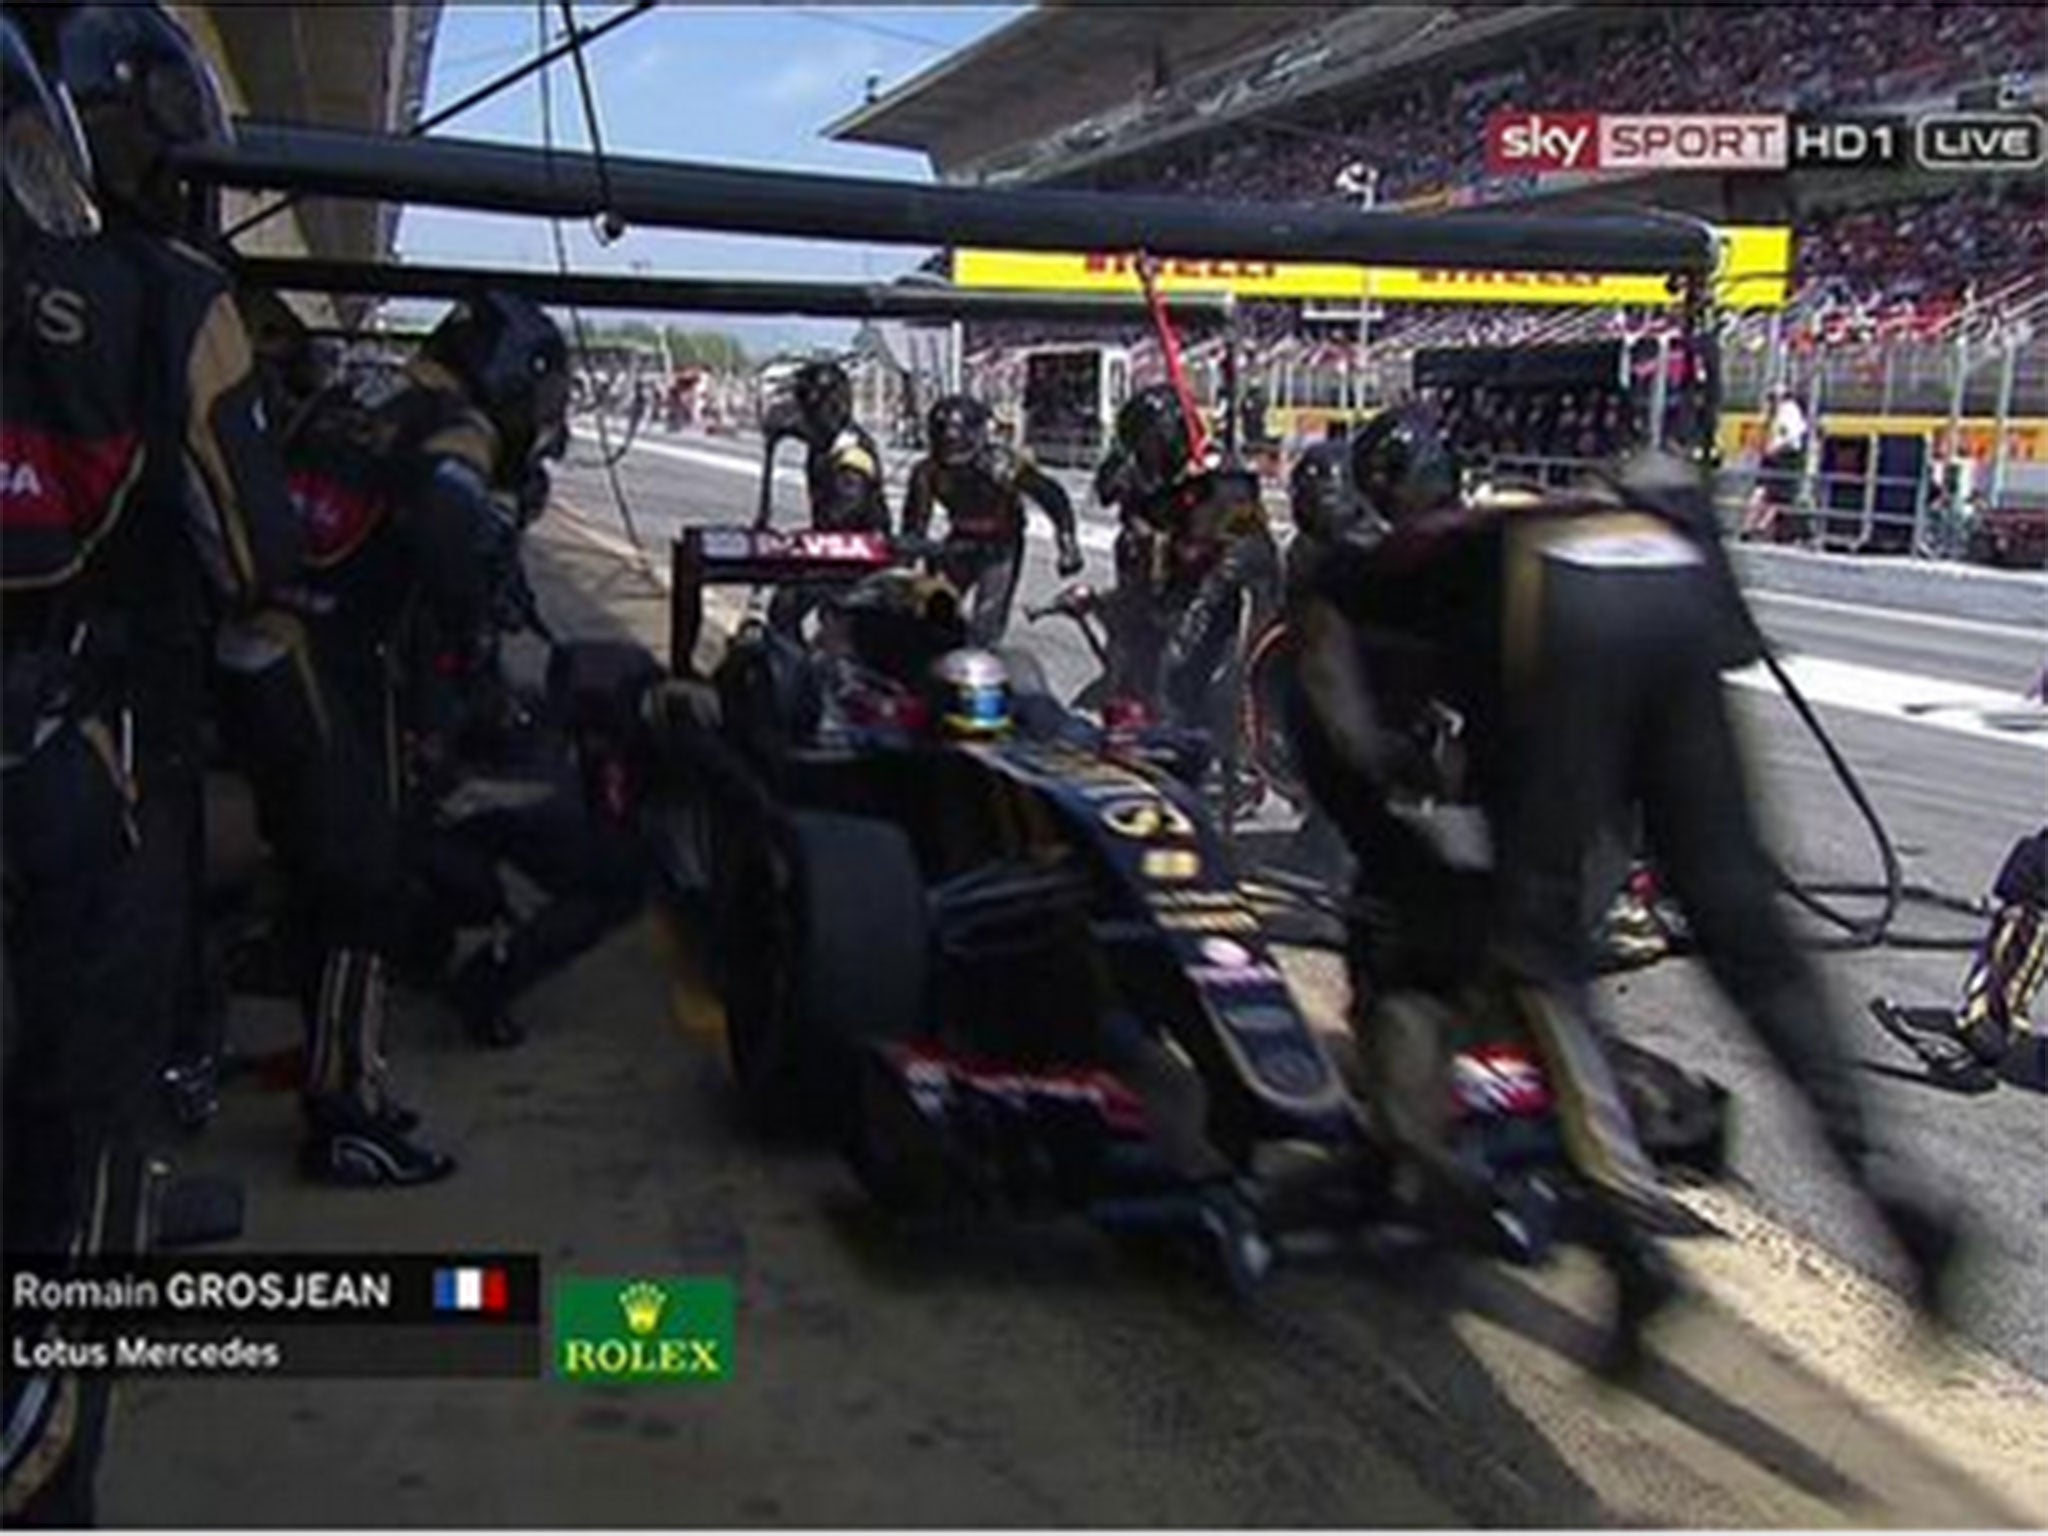 A mechanic is flung in the air after Romain Grosjean overshoots his pit box